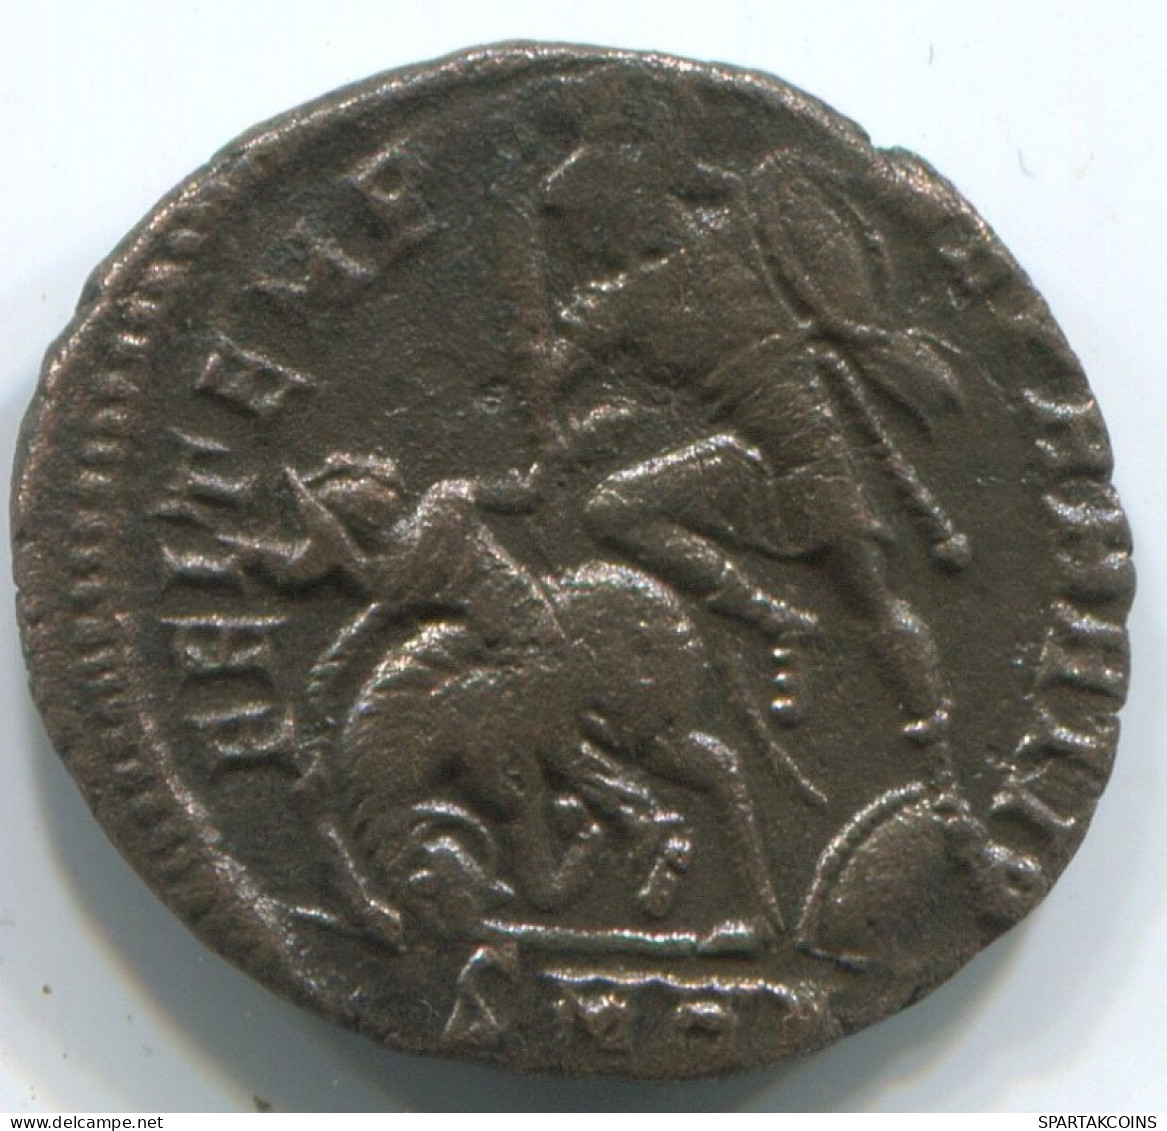 LATE ROMAN EMPIRE Pièce Antique Authentique Roman Pièce 1.7g/19mm #ANT2229.14.F.A - The End Of Empire (363 AD To 476 AD)